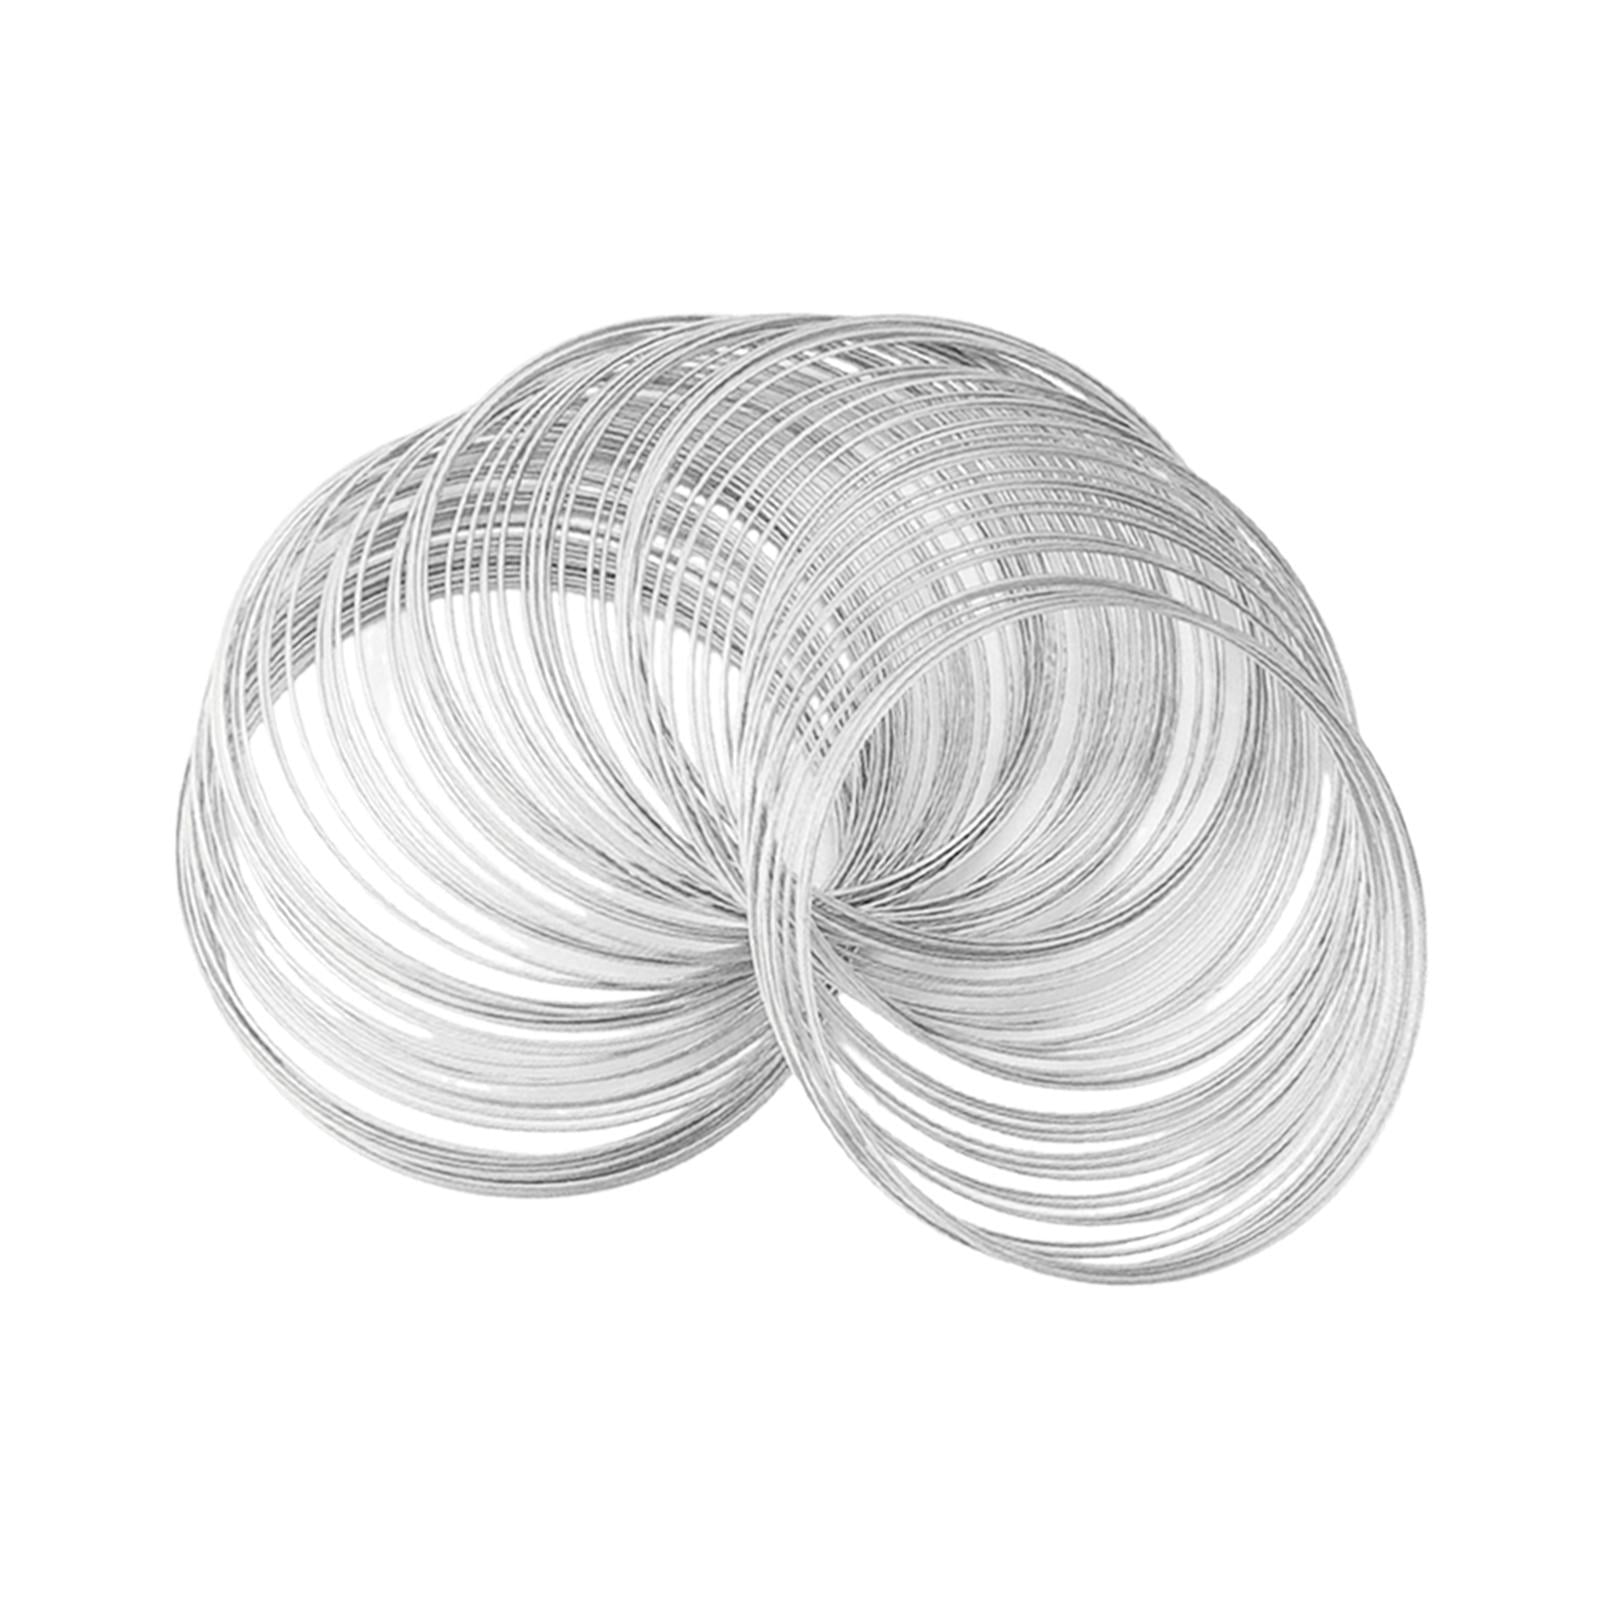 Memory Wire Metal Wire 0.6mm Strong 100 Loops Stainless Steel Thin Jewellery Wire Beading Wire for Cuff Bangle Earring DIY Crafts Handmade White K